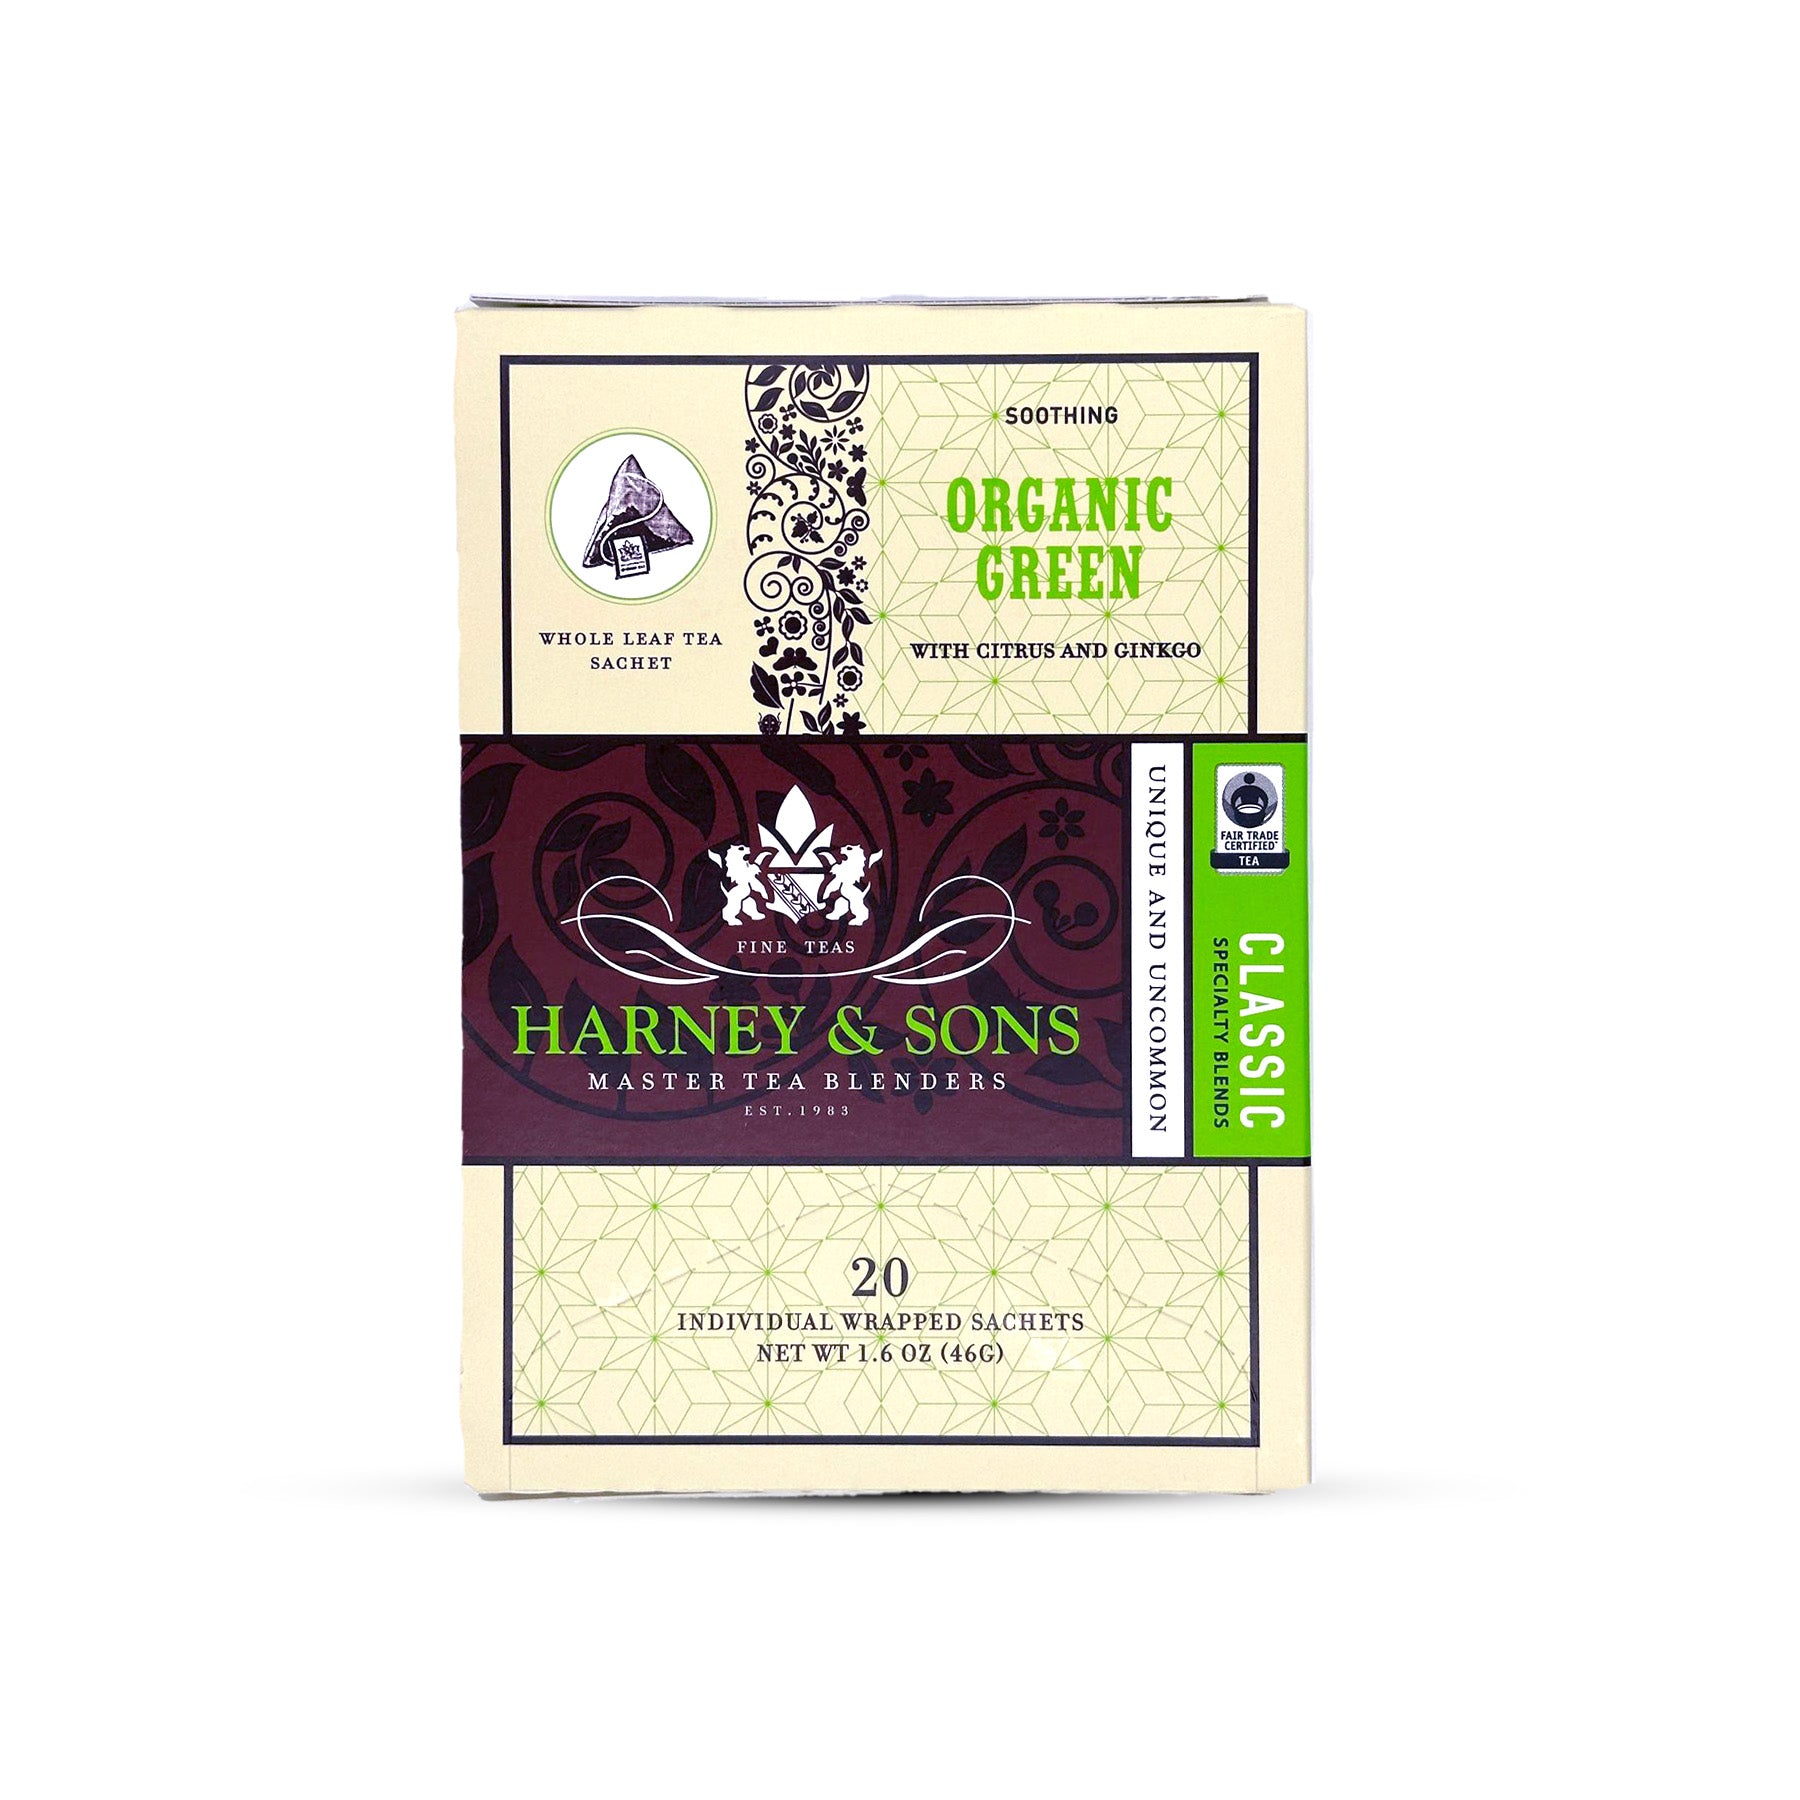 Organic Green with Citrus & Ginkgo, Box of 20 Individually Wrapped Sachets - Harney & Sons Fine Teas